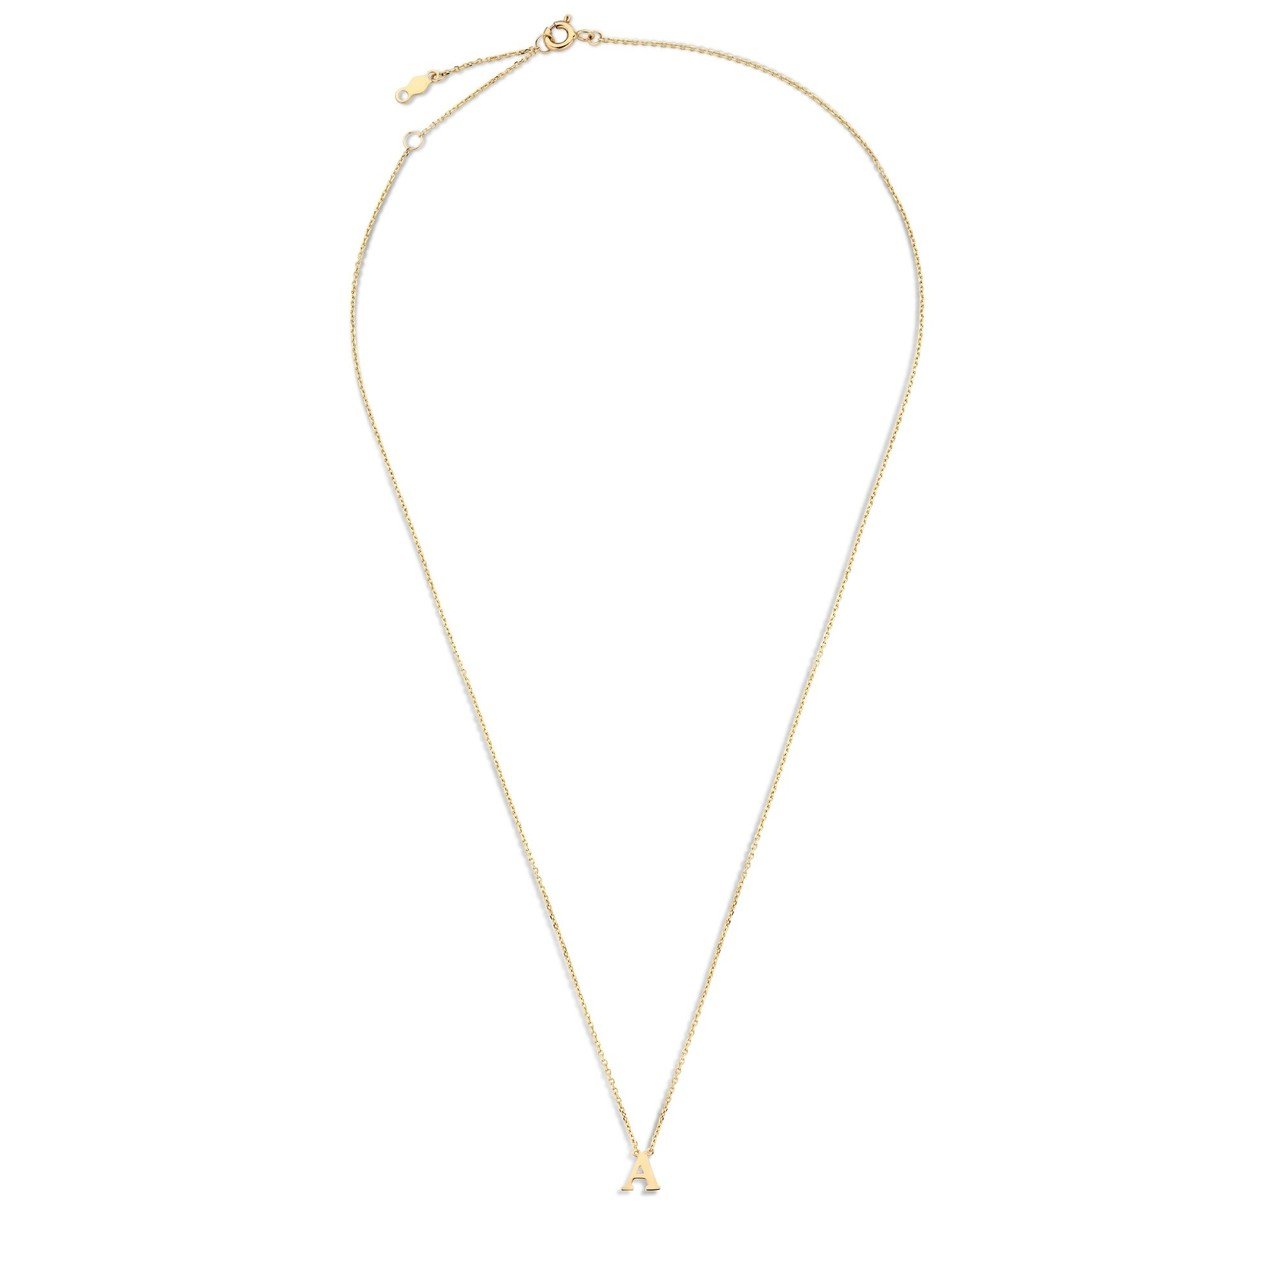 Initial necklace gold - 14k gold initial necklace